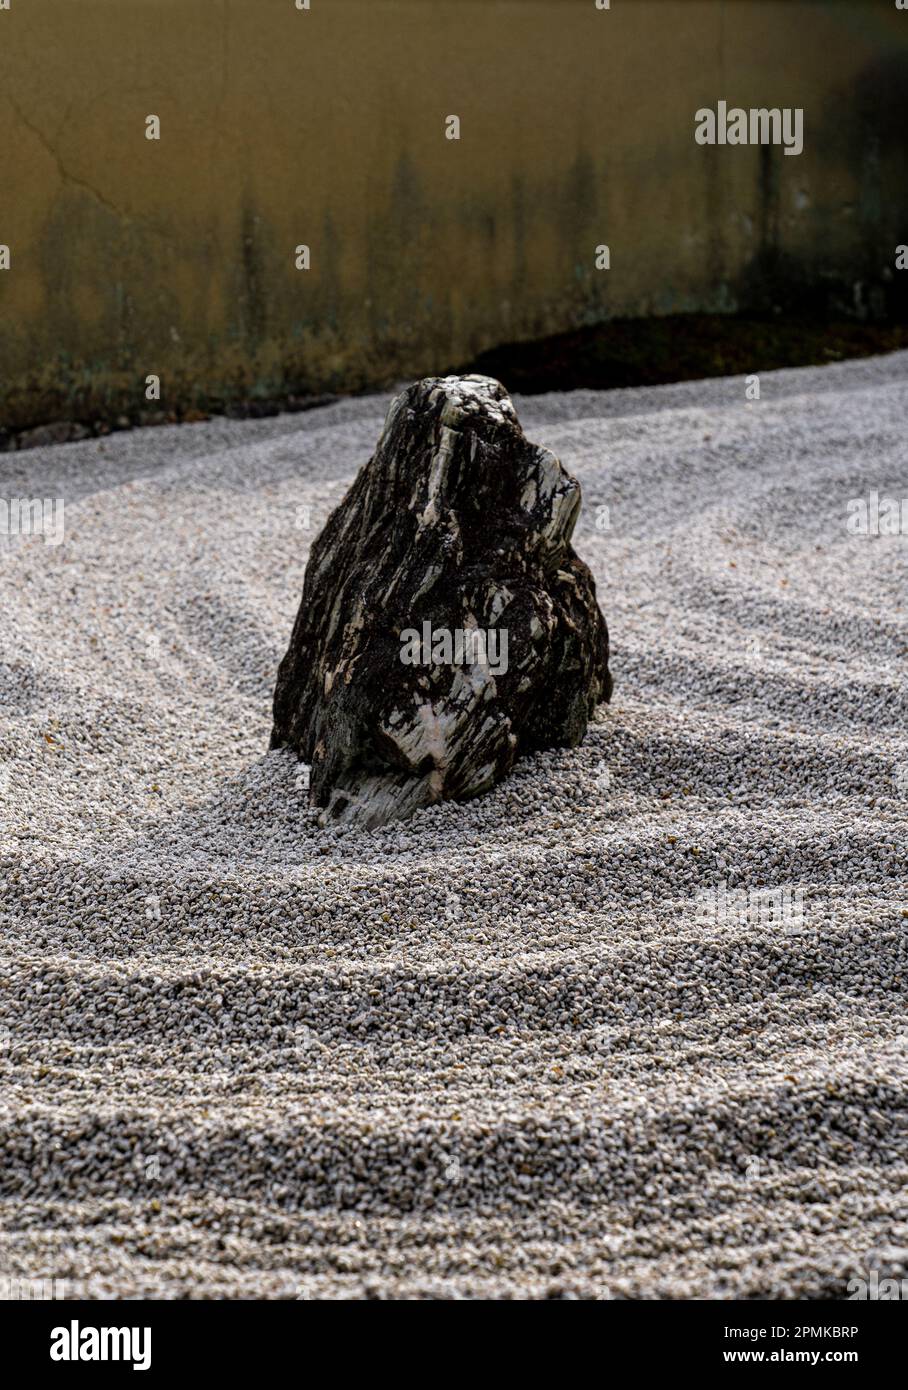 Dokuza-tei or Alone Sitting Garden in Zuihoin, Daitokuji Rinzai Zen temple, designed by Shigemori Mirei with the use of just rocks, gravel, and moss. Stock Photo